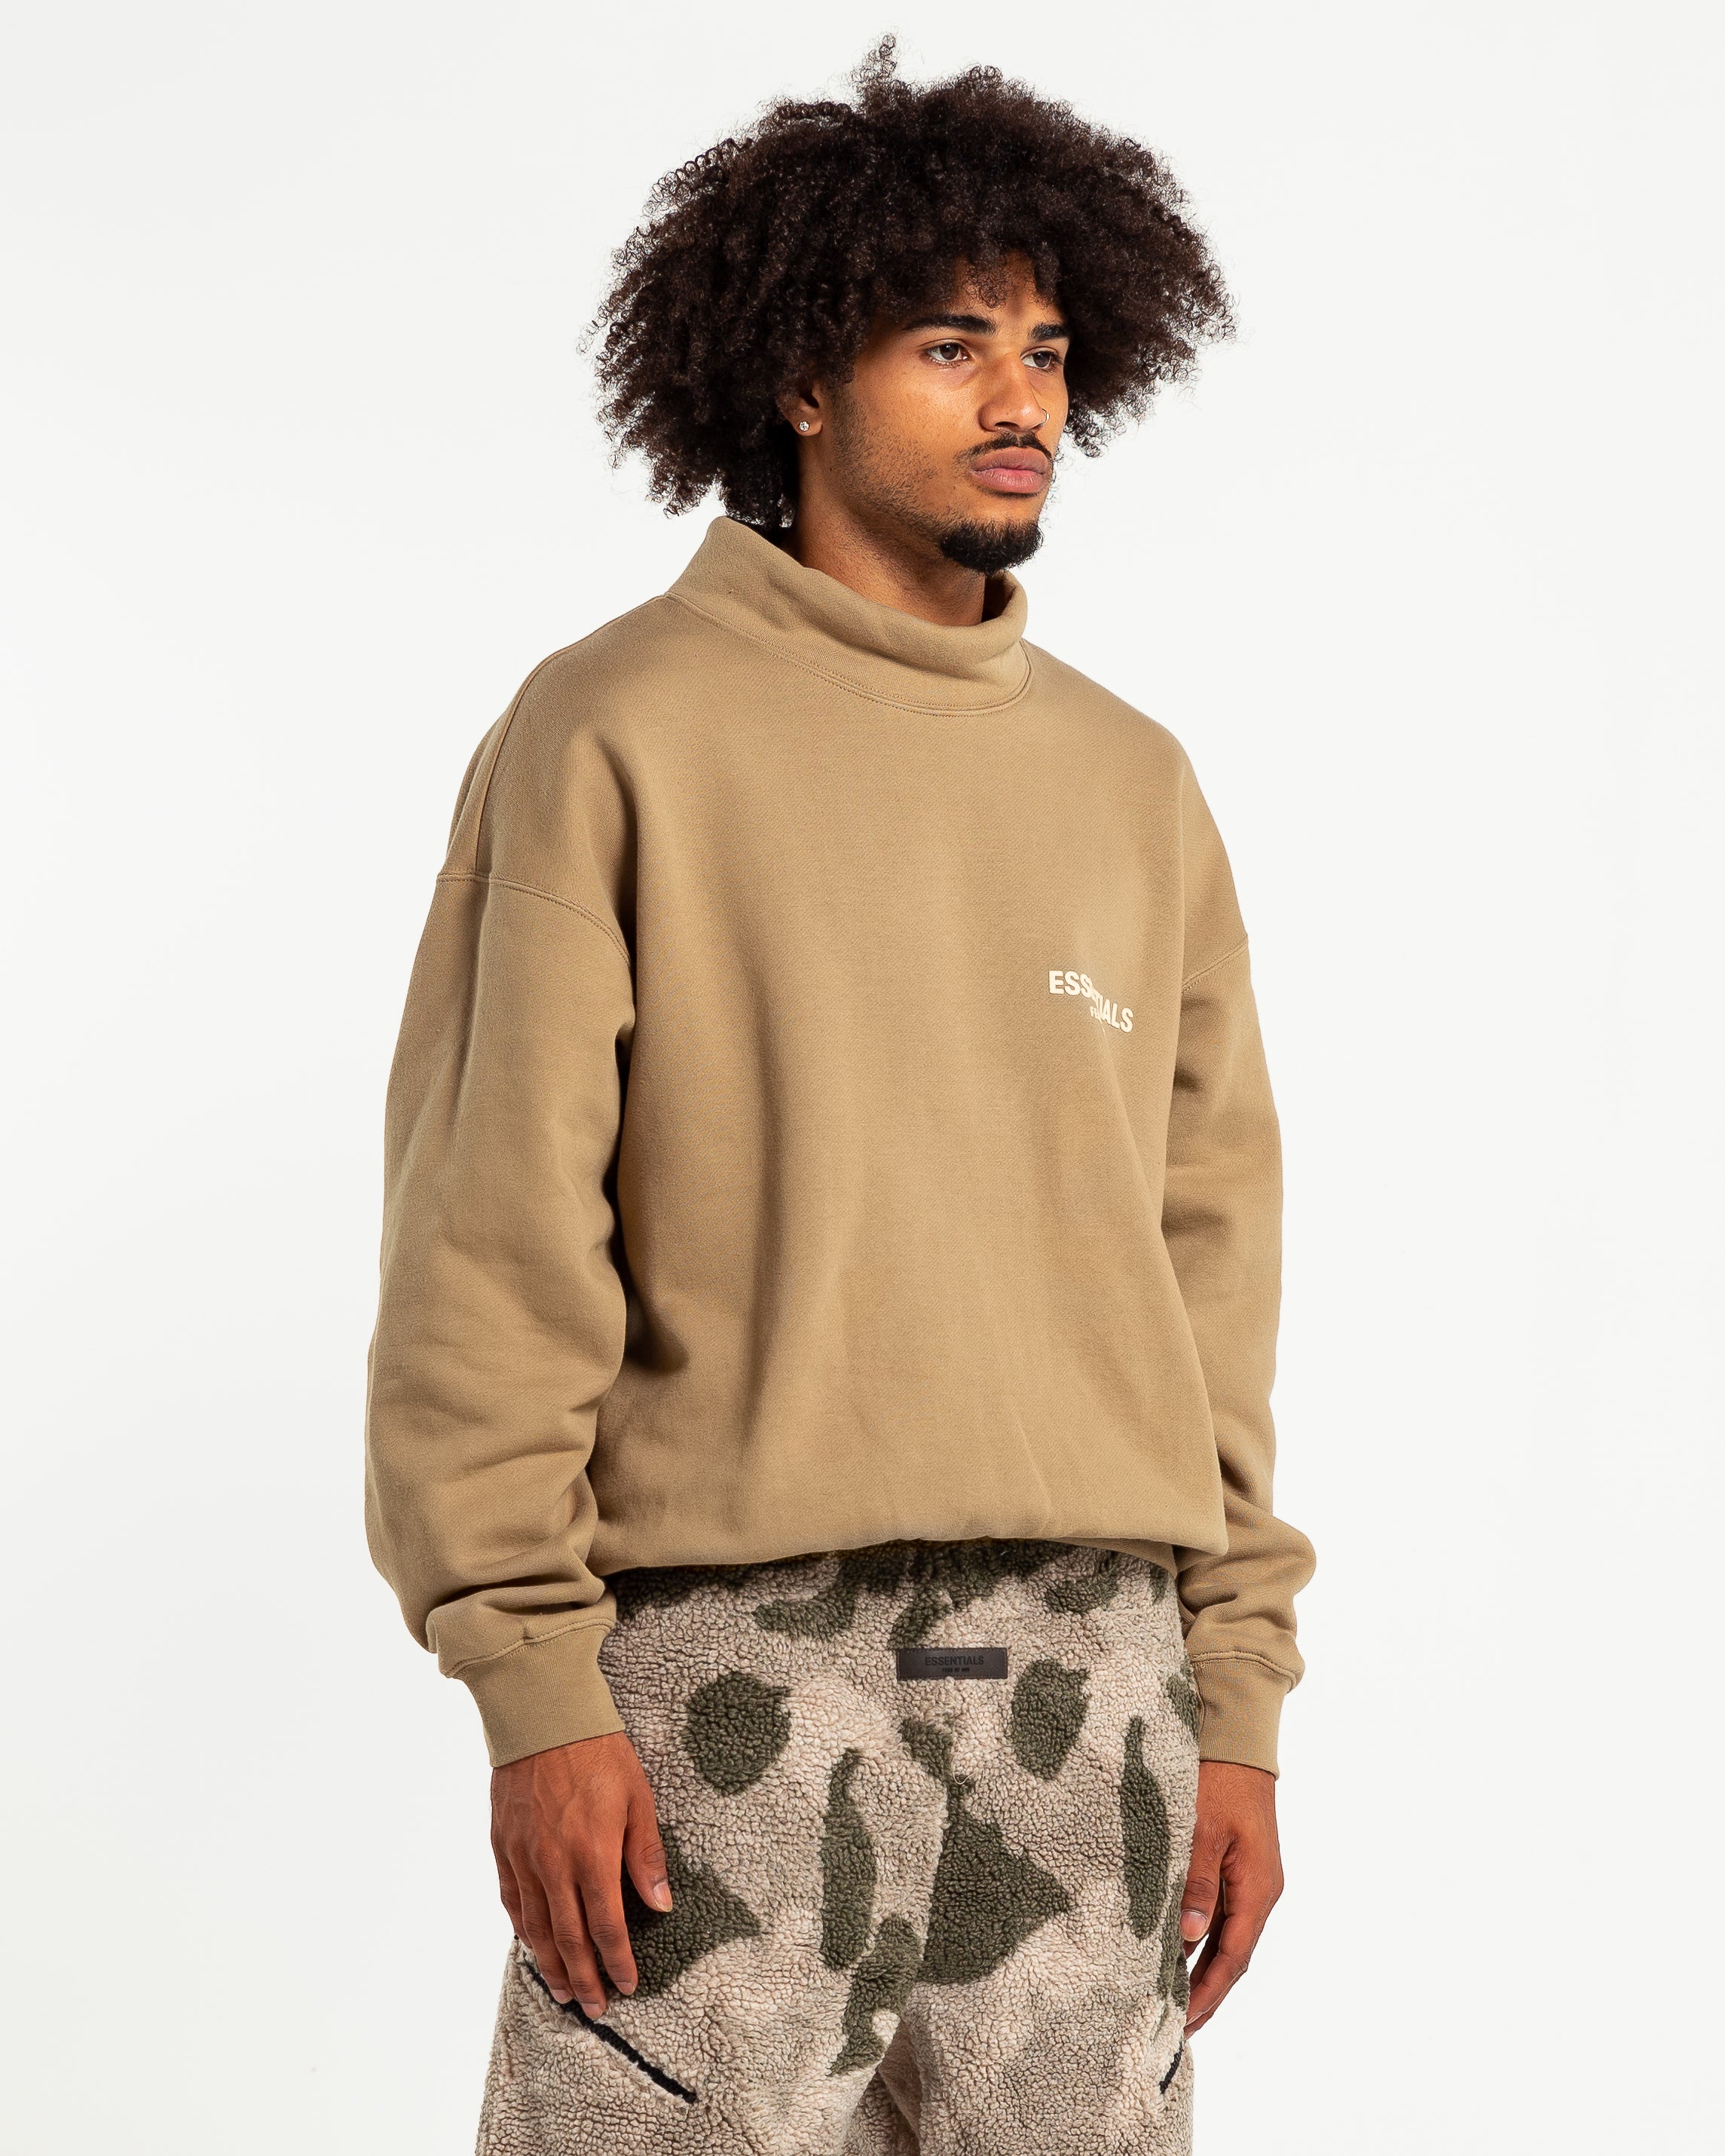 Fear of God Essentials All Deals, Sale & Clearance